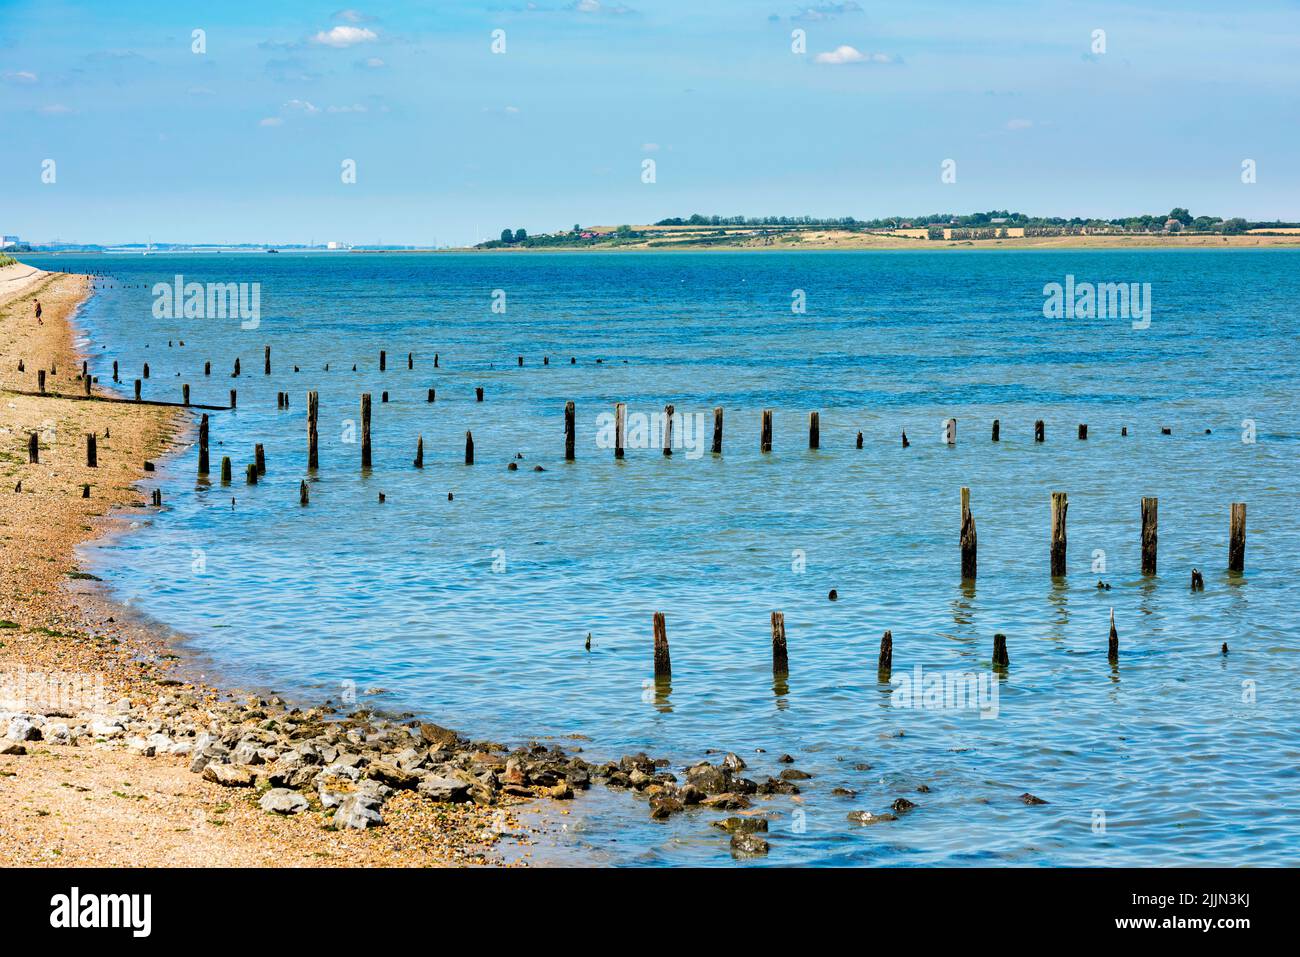 View across the Swale Estuary to the Isle of Sheppey from Seasalter in Kent, England Stock Photo